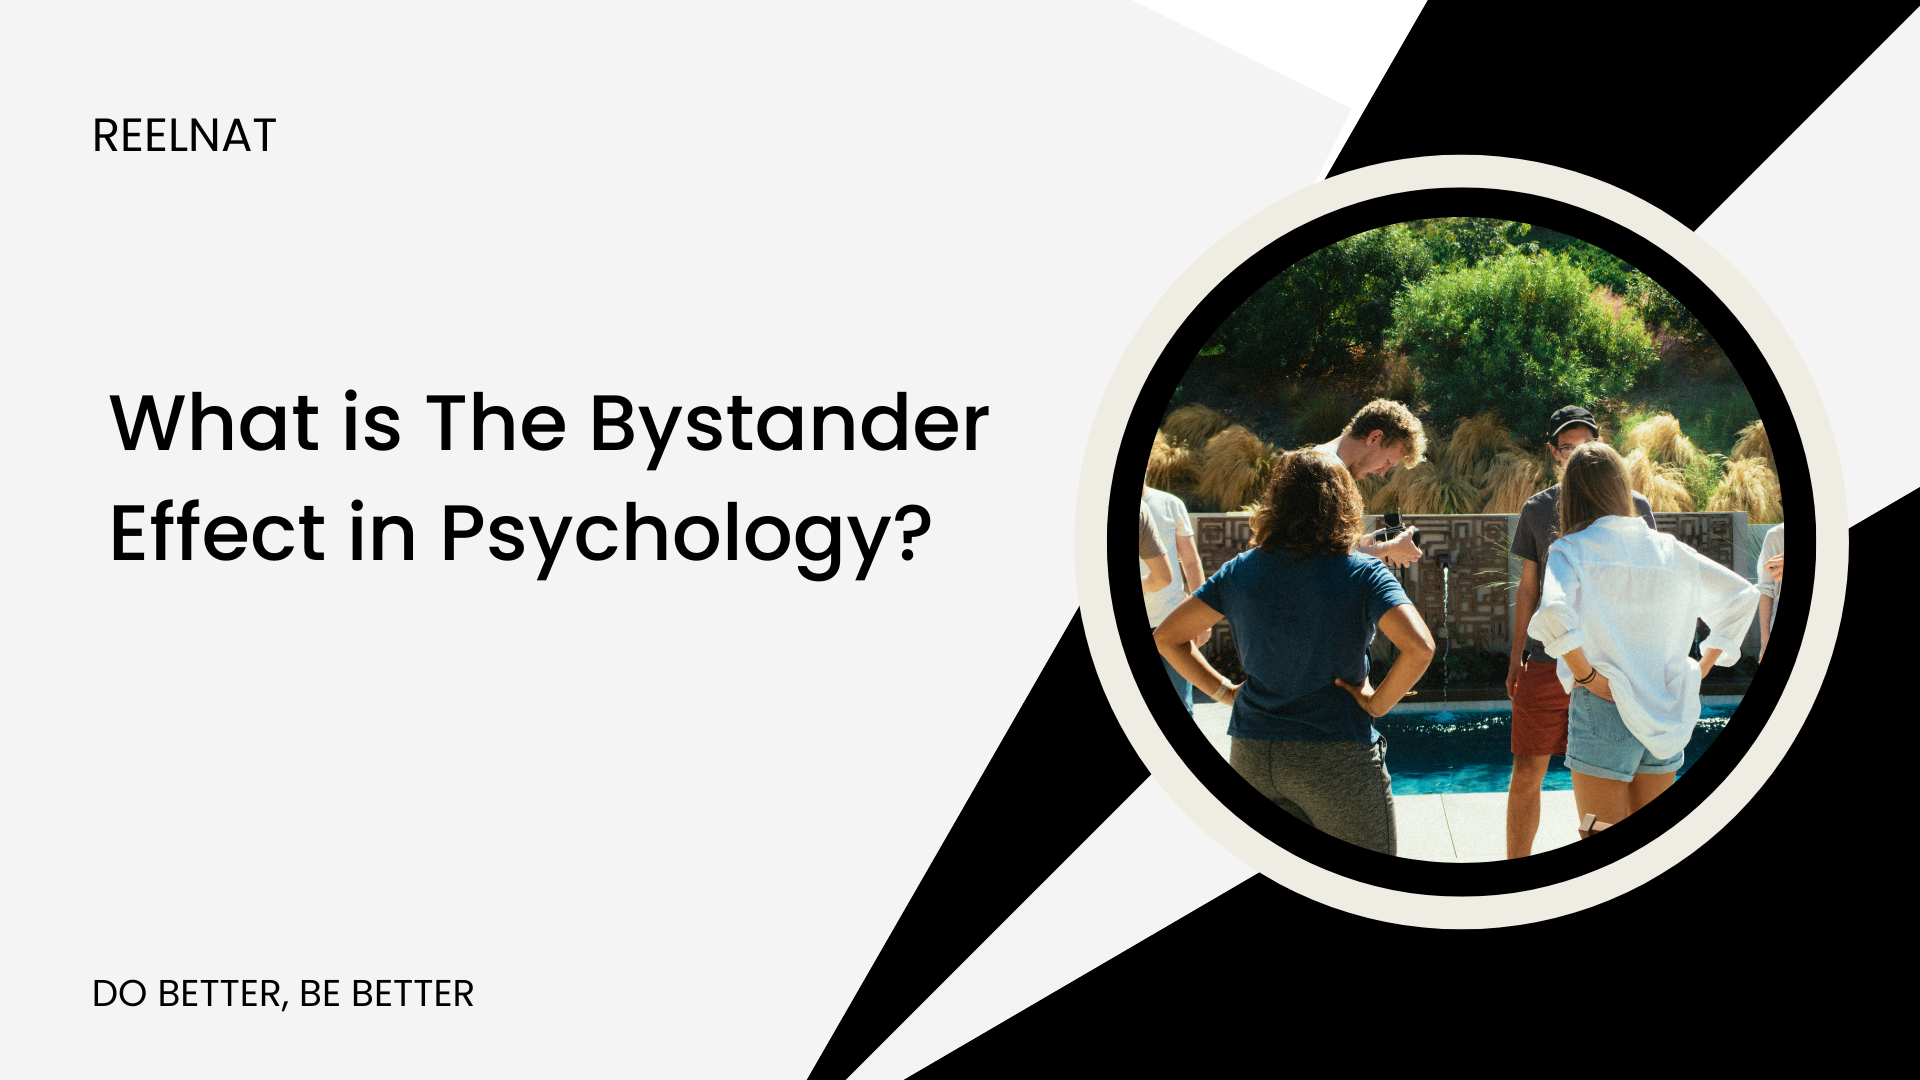 What is The Bystander Effect in Psychology?